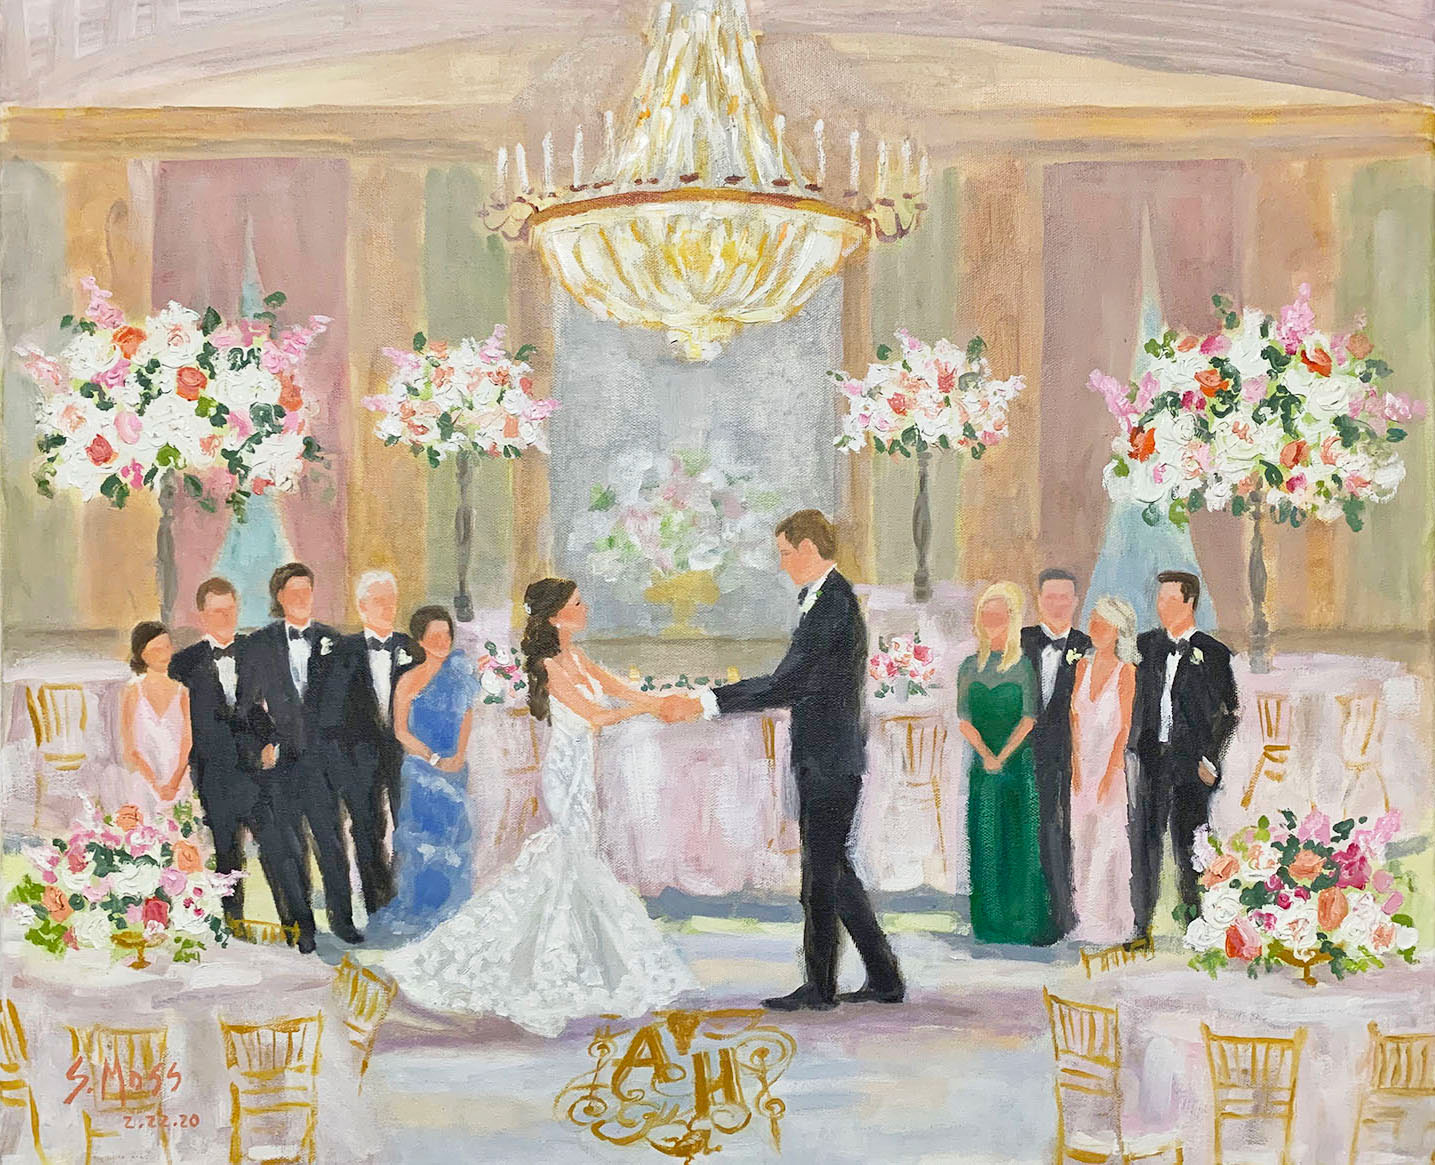 Wedding and Live Event Painting, Susan Moss Cooper, Dallas, Texas, Fort Worth, Texas, Fort Worth Club wedding painting.